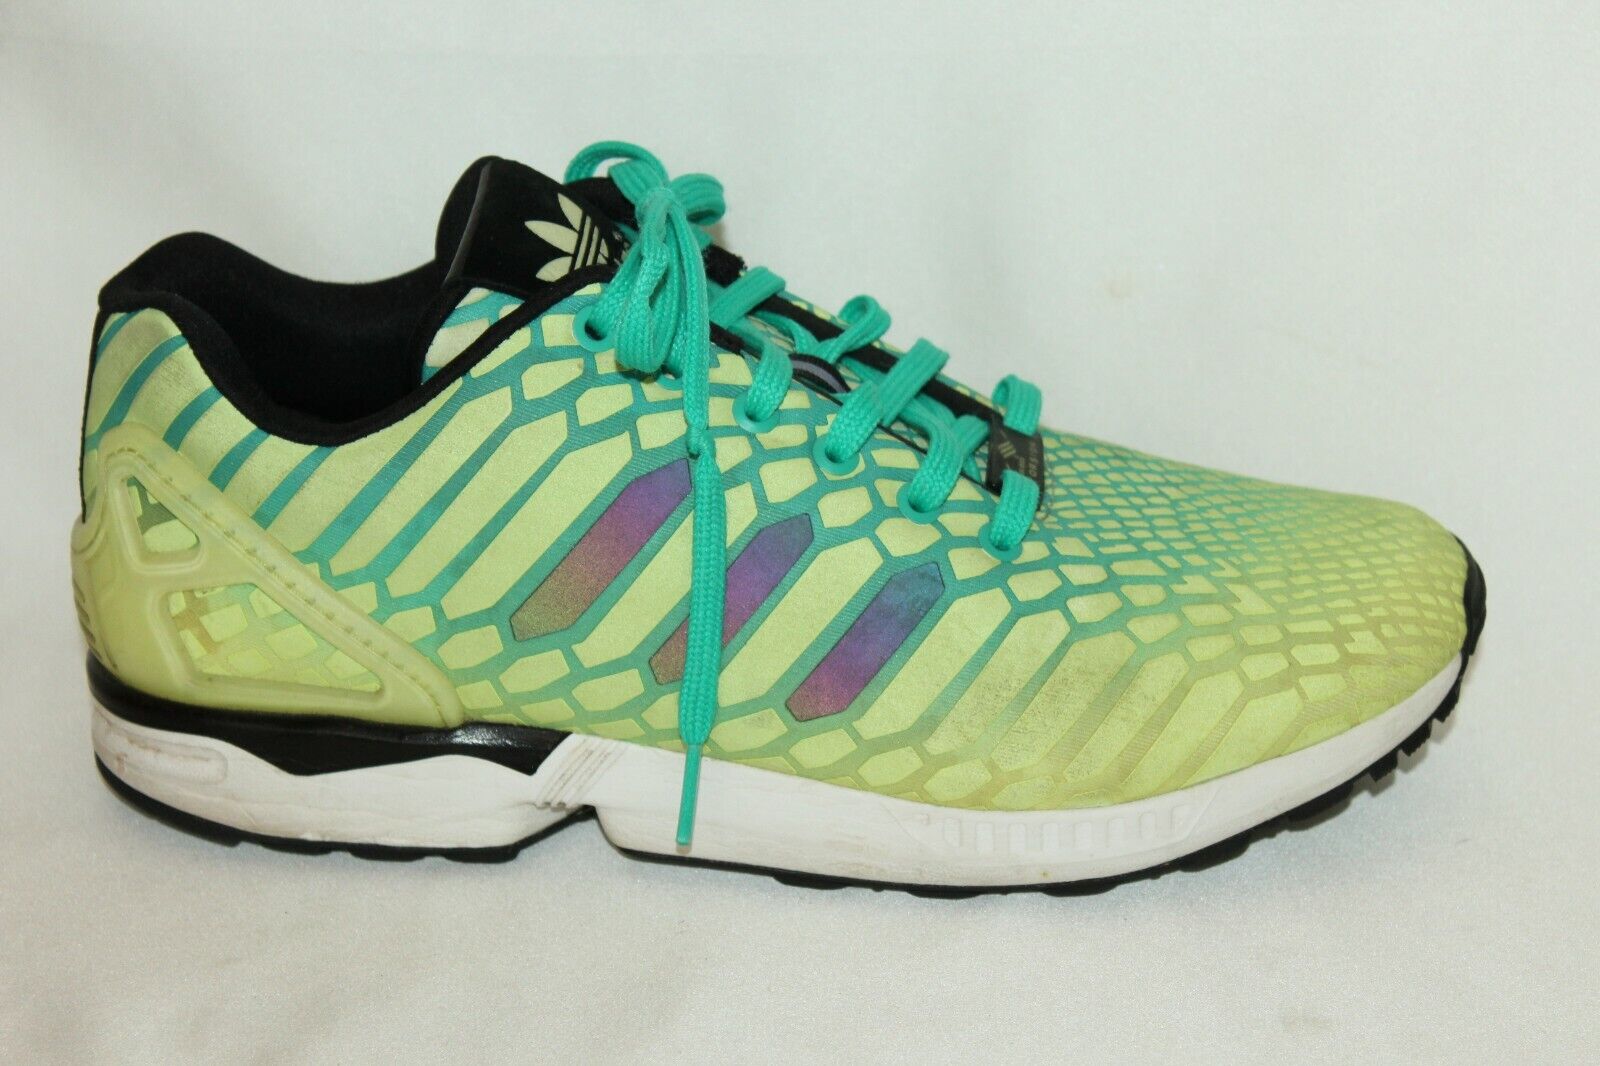 ADIDAS ZX FLUX Yellow Trainer Sneakers Shoes Sz 10 |